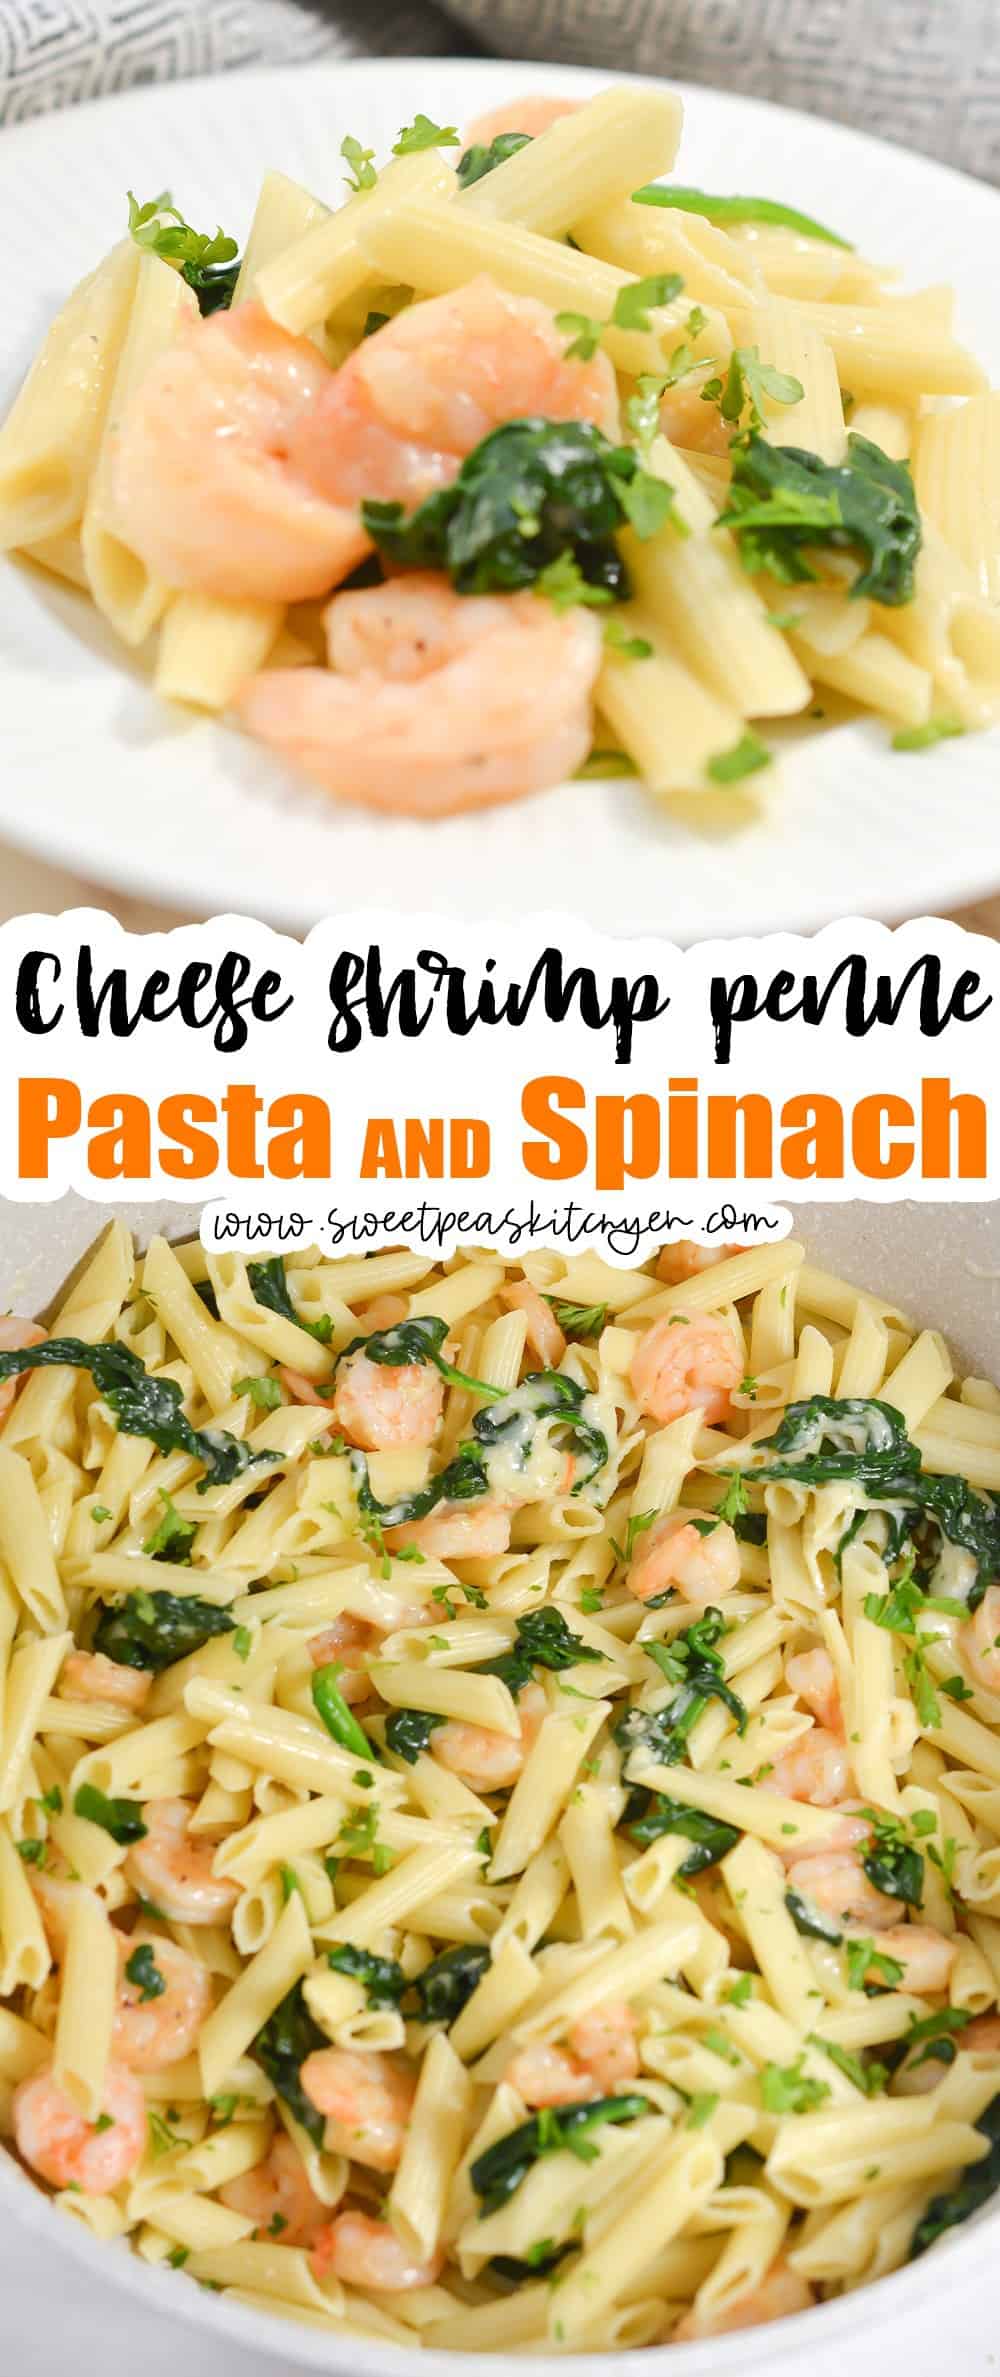 Cheese Shrimp Penne Pasta and Spinach